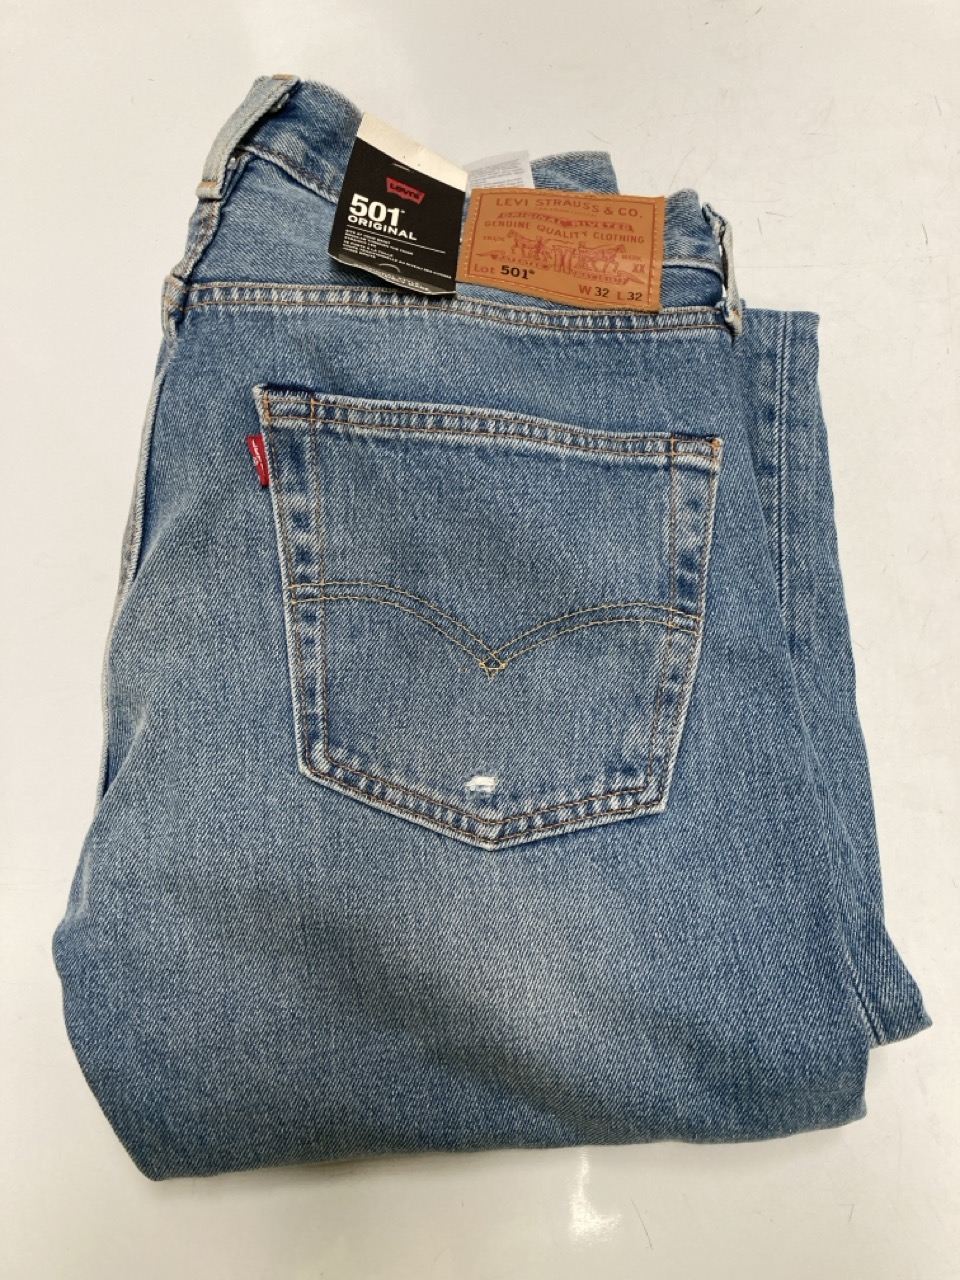 2 X MEN'S CLOTHING ITEMS TO INCLUDE LEVIS JEANS IN SIZE W32 L 32